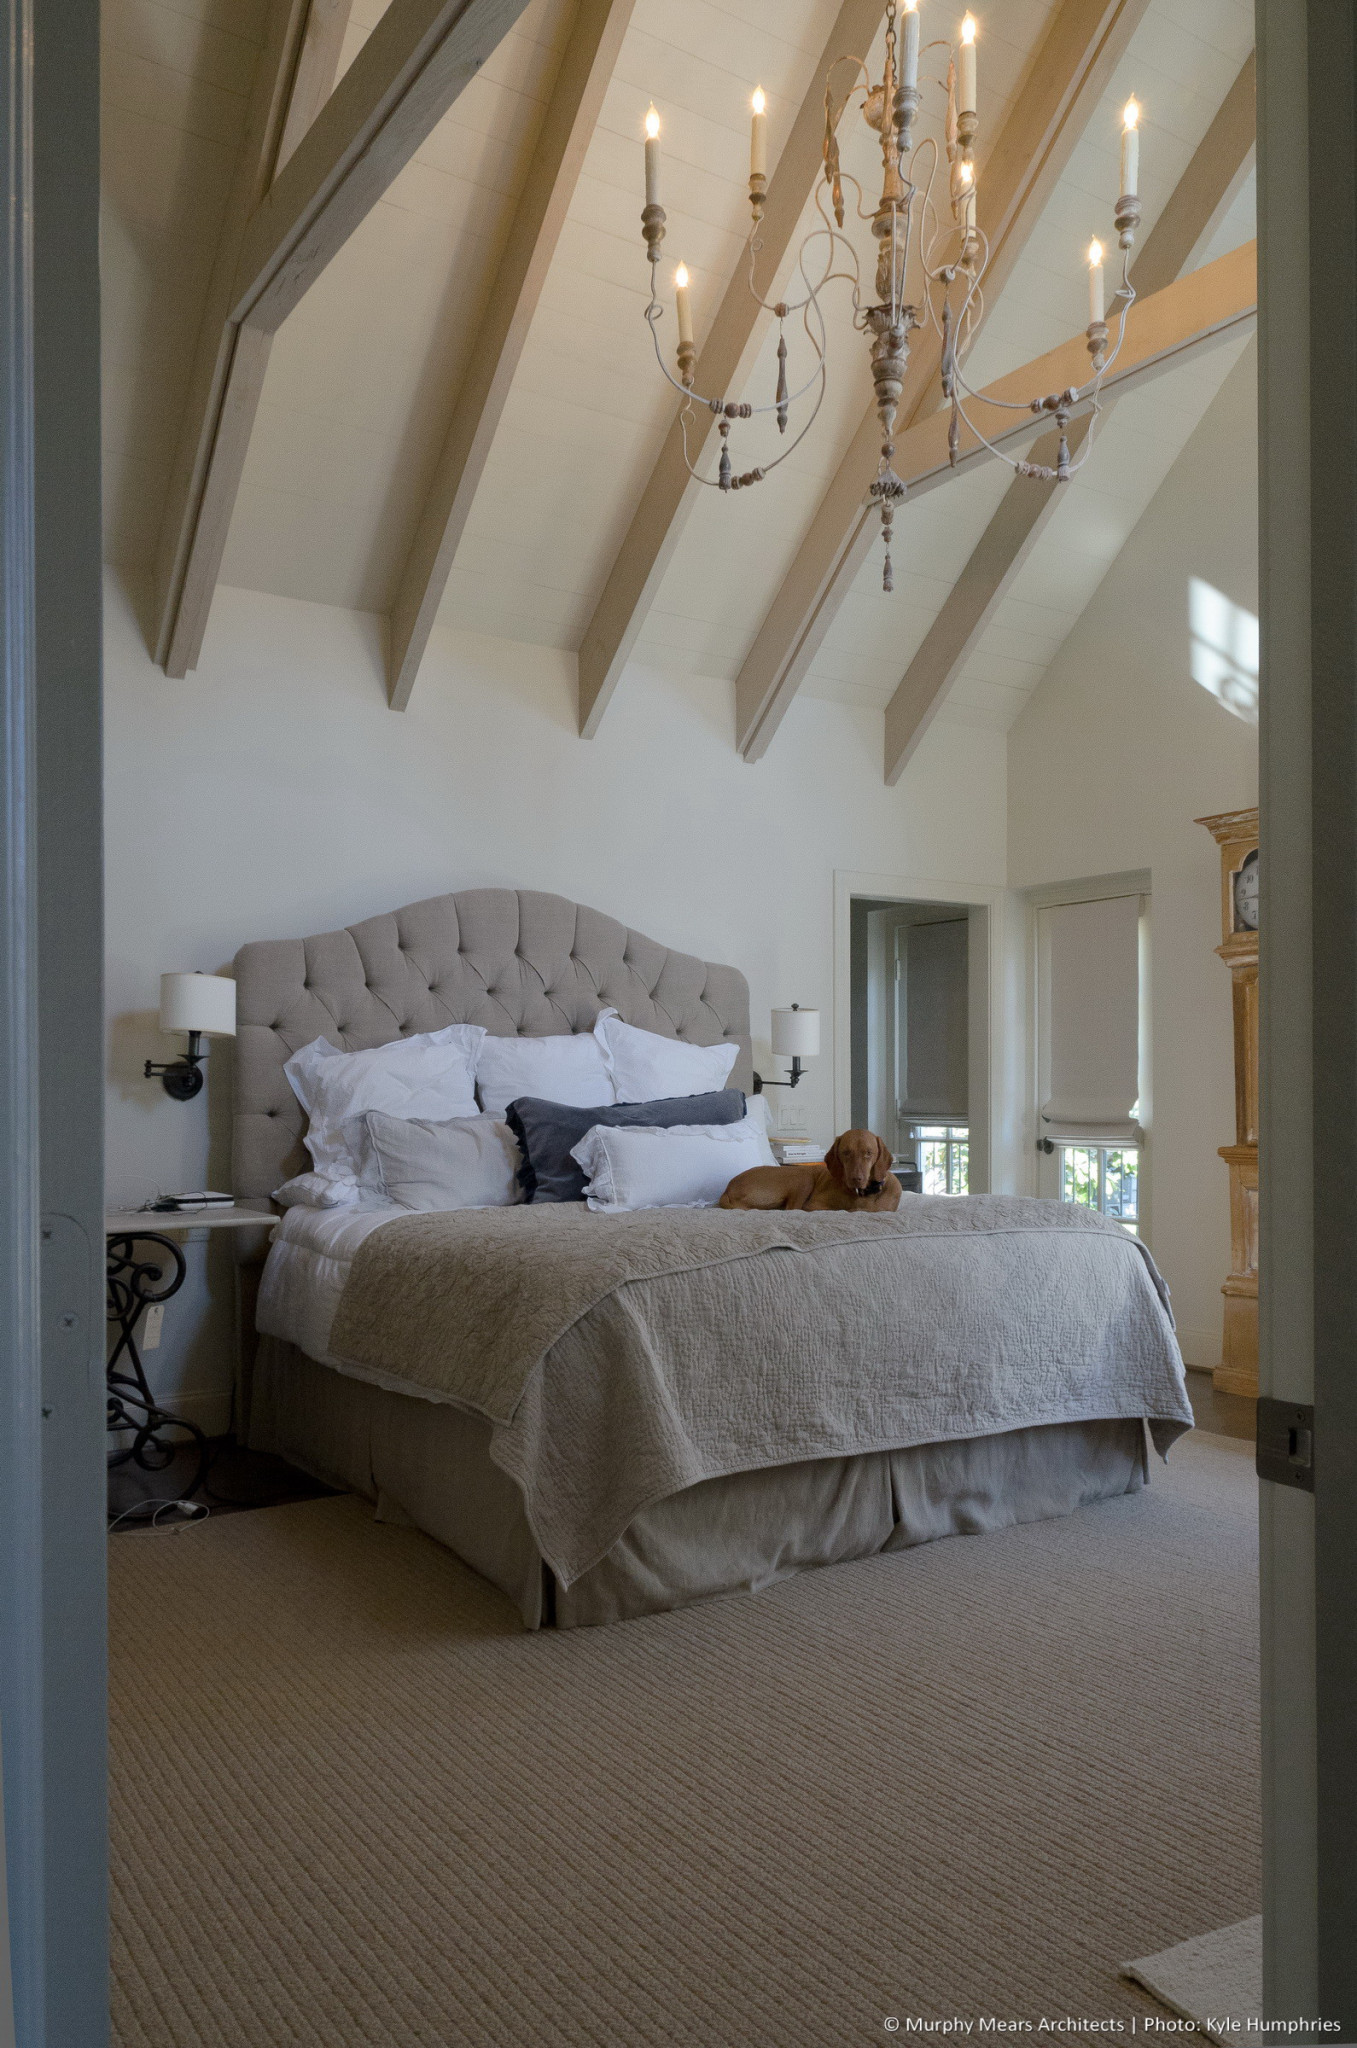 Pemberton Residence - New master bedroom addition with vaulted ceiling and high natural light.